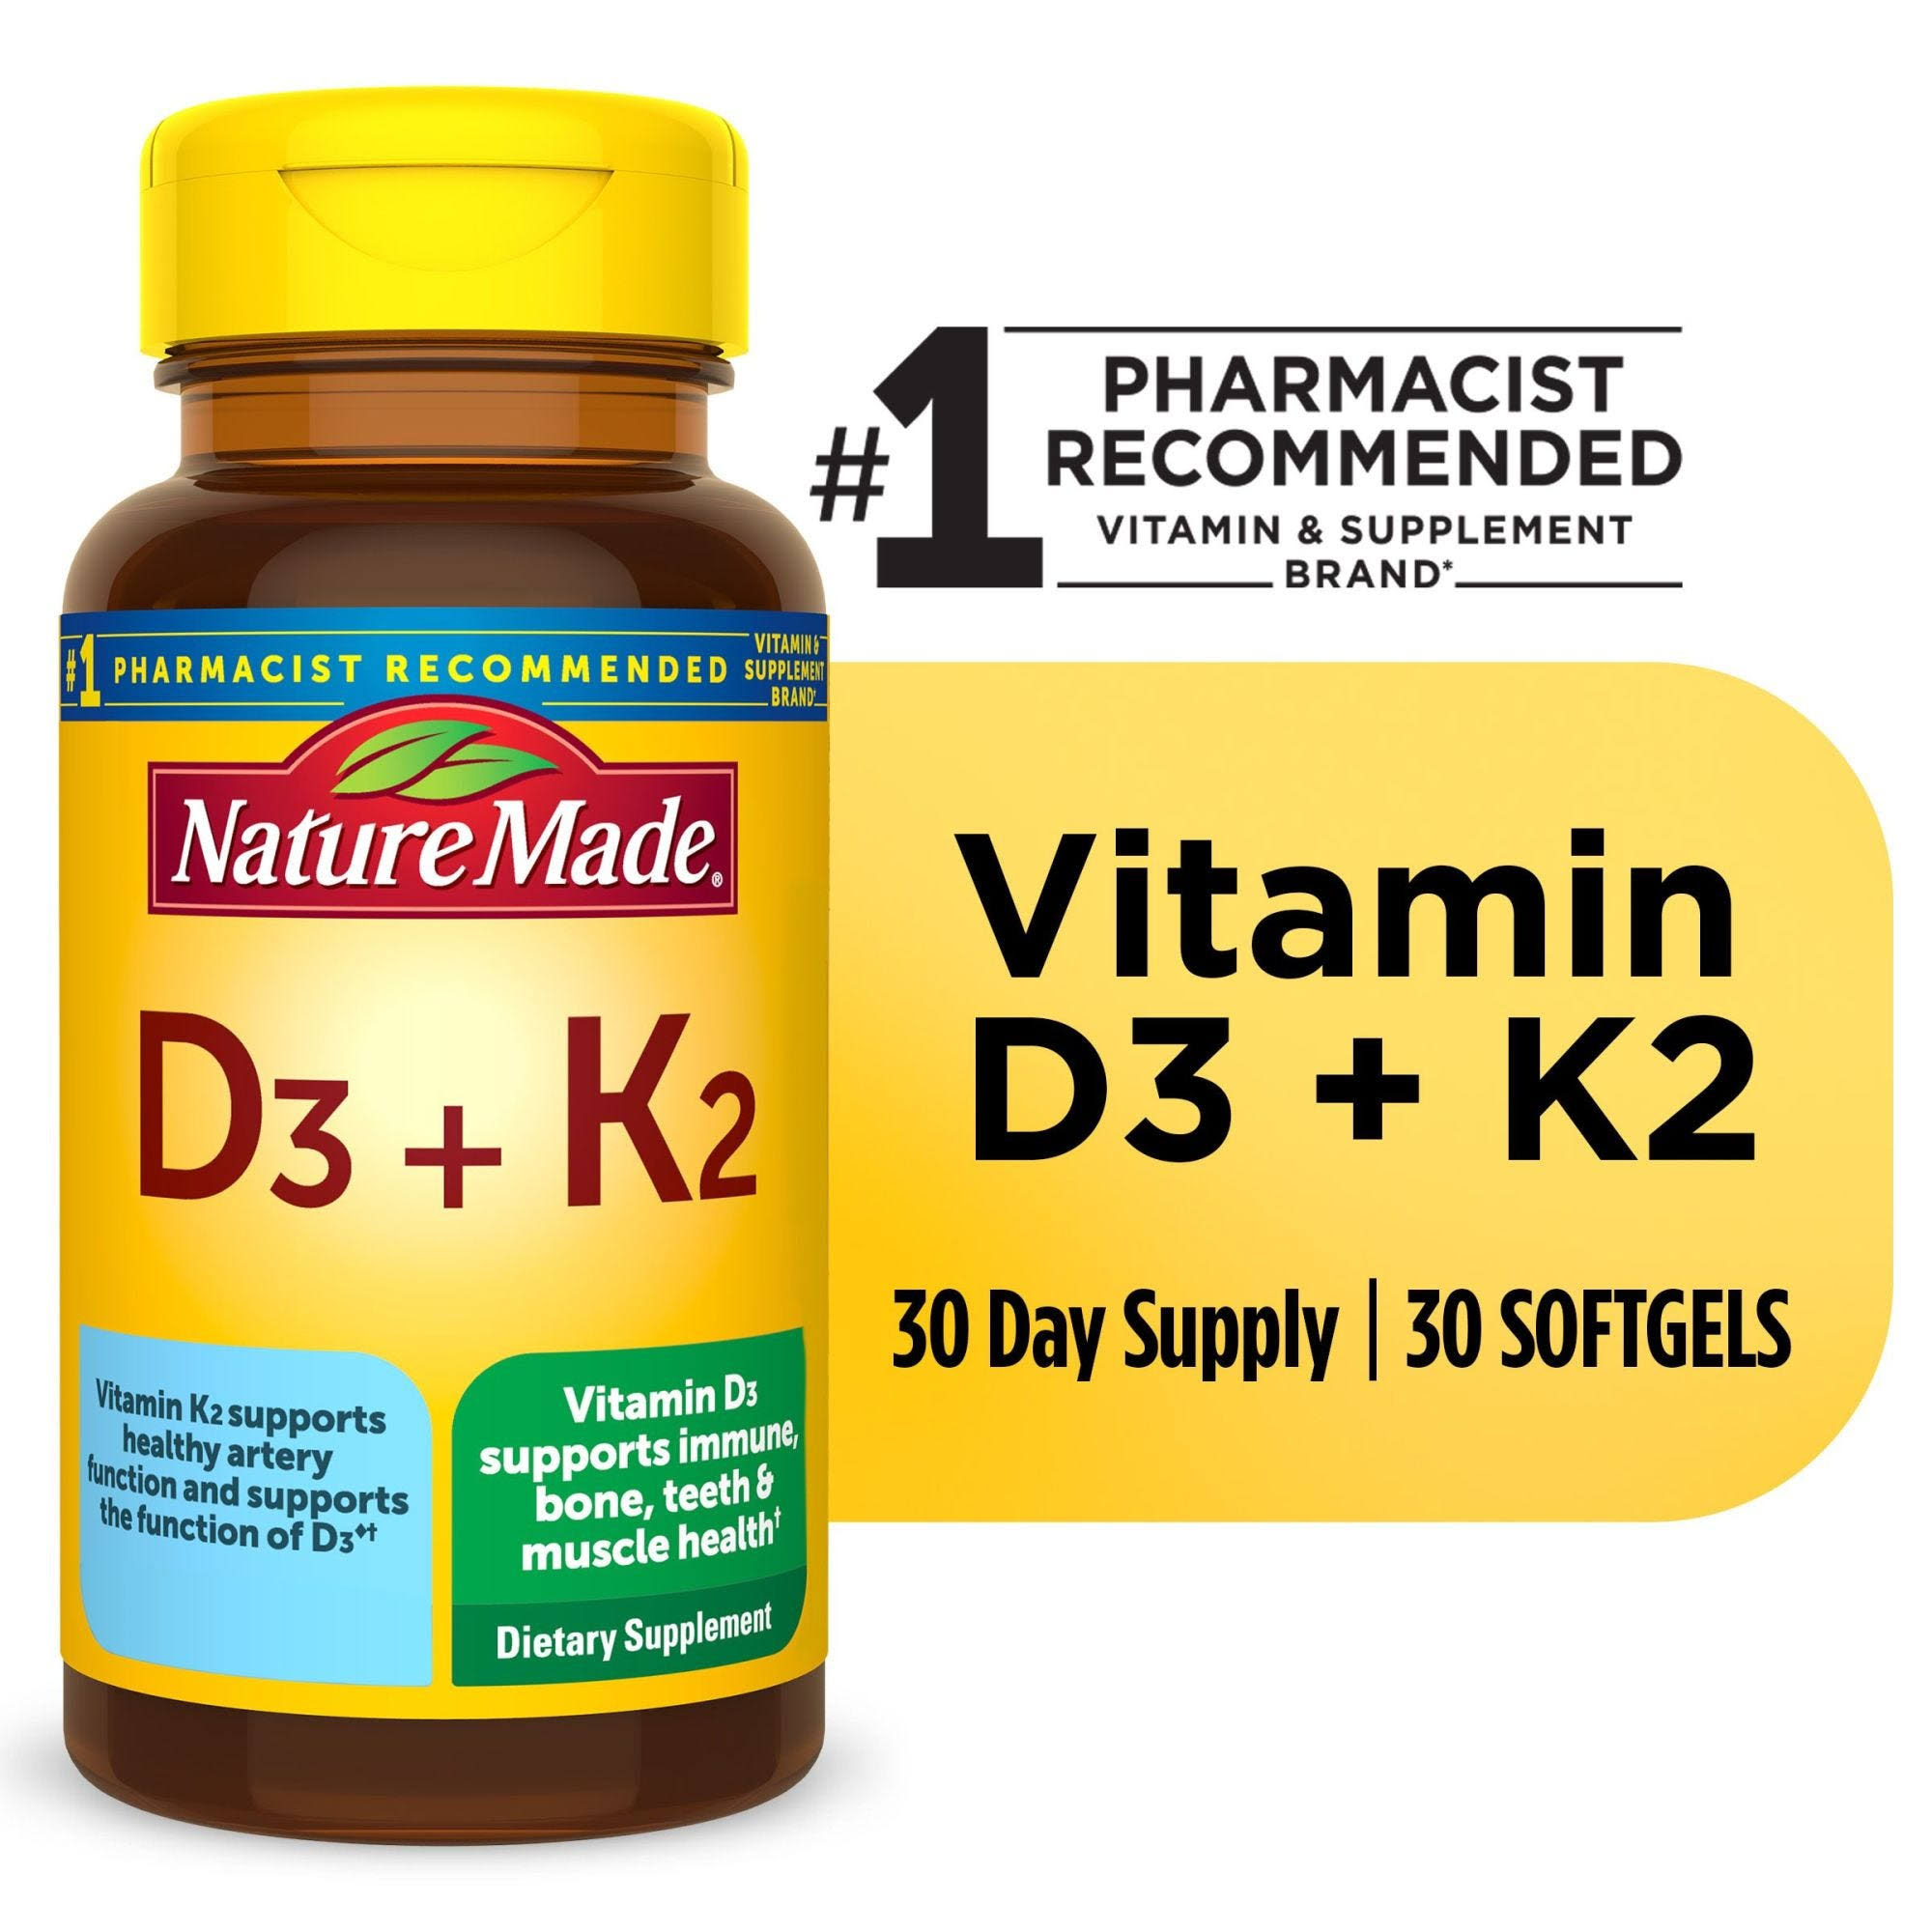 Nature Made Vitamin D3 K2, 5000 IU Vitamin D, Dietary Supplement For Bone, Teeth, Muscle And Immune Health Support, 30 Softgels, 30 Day Supply